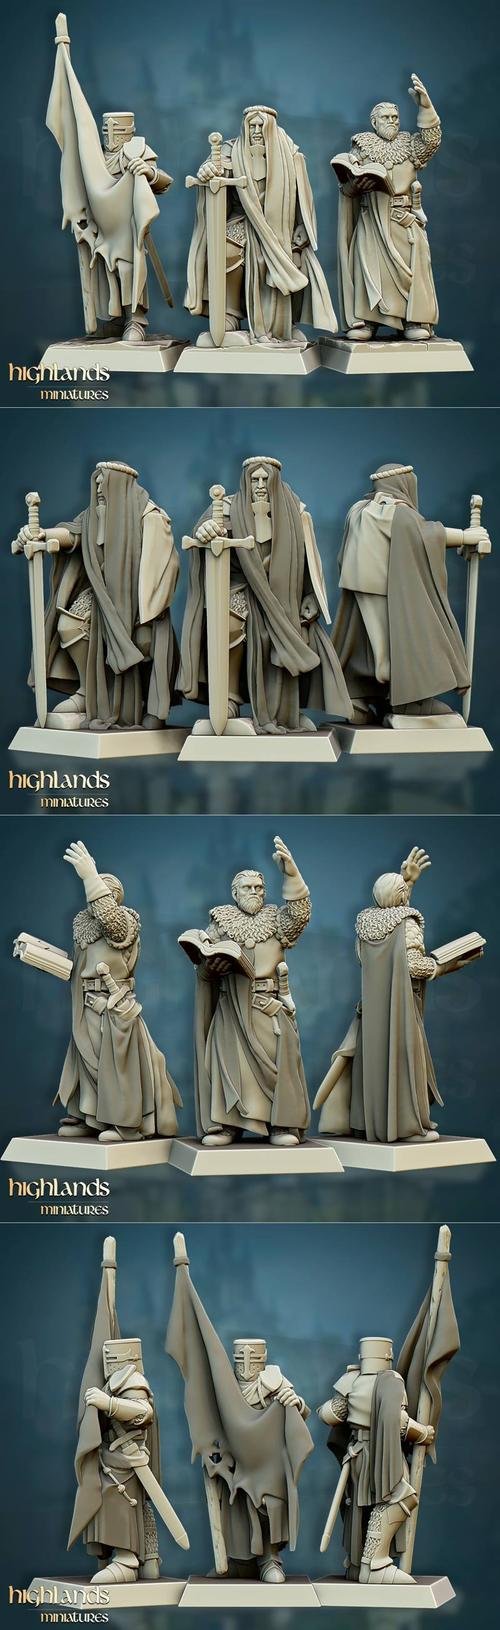 Highlands Miniatures - Crusaders Command Group 3D Print